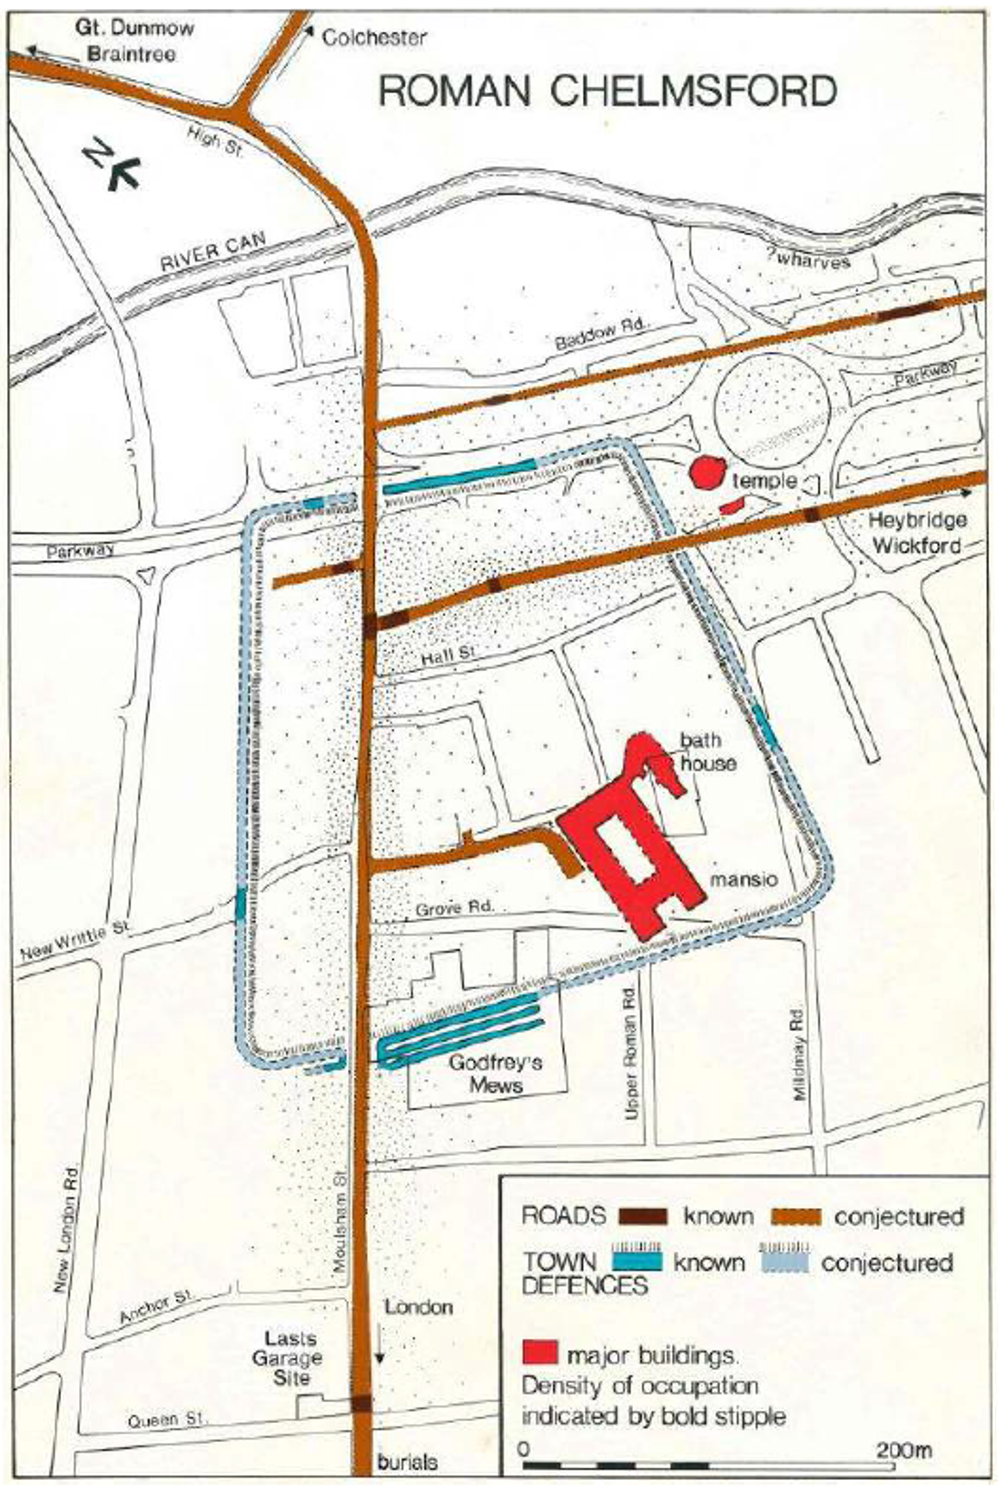 Map showing sites of Roman remains in Chelmsford